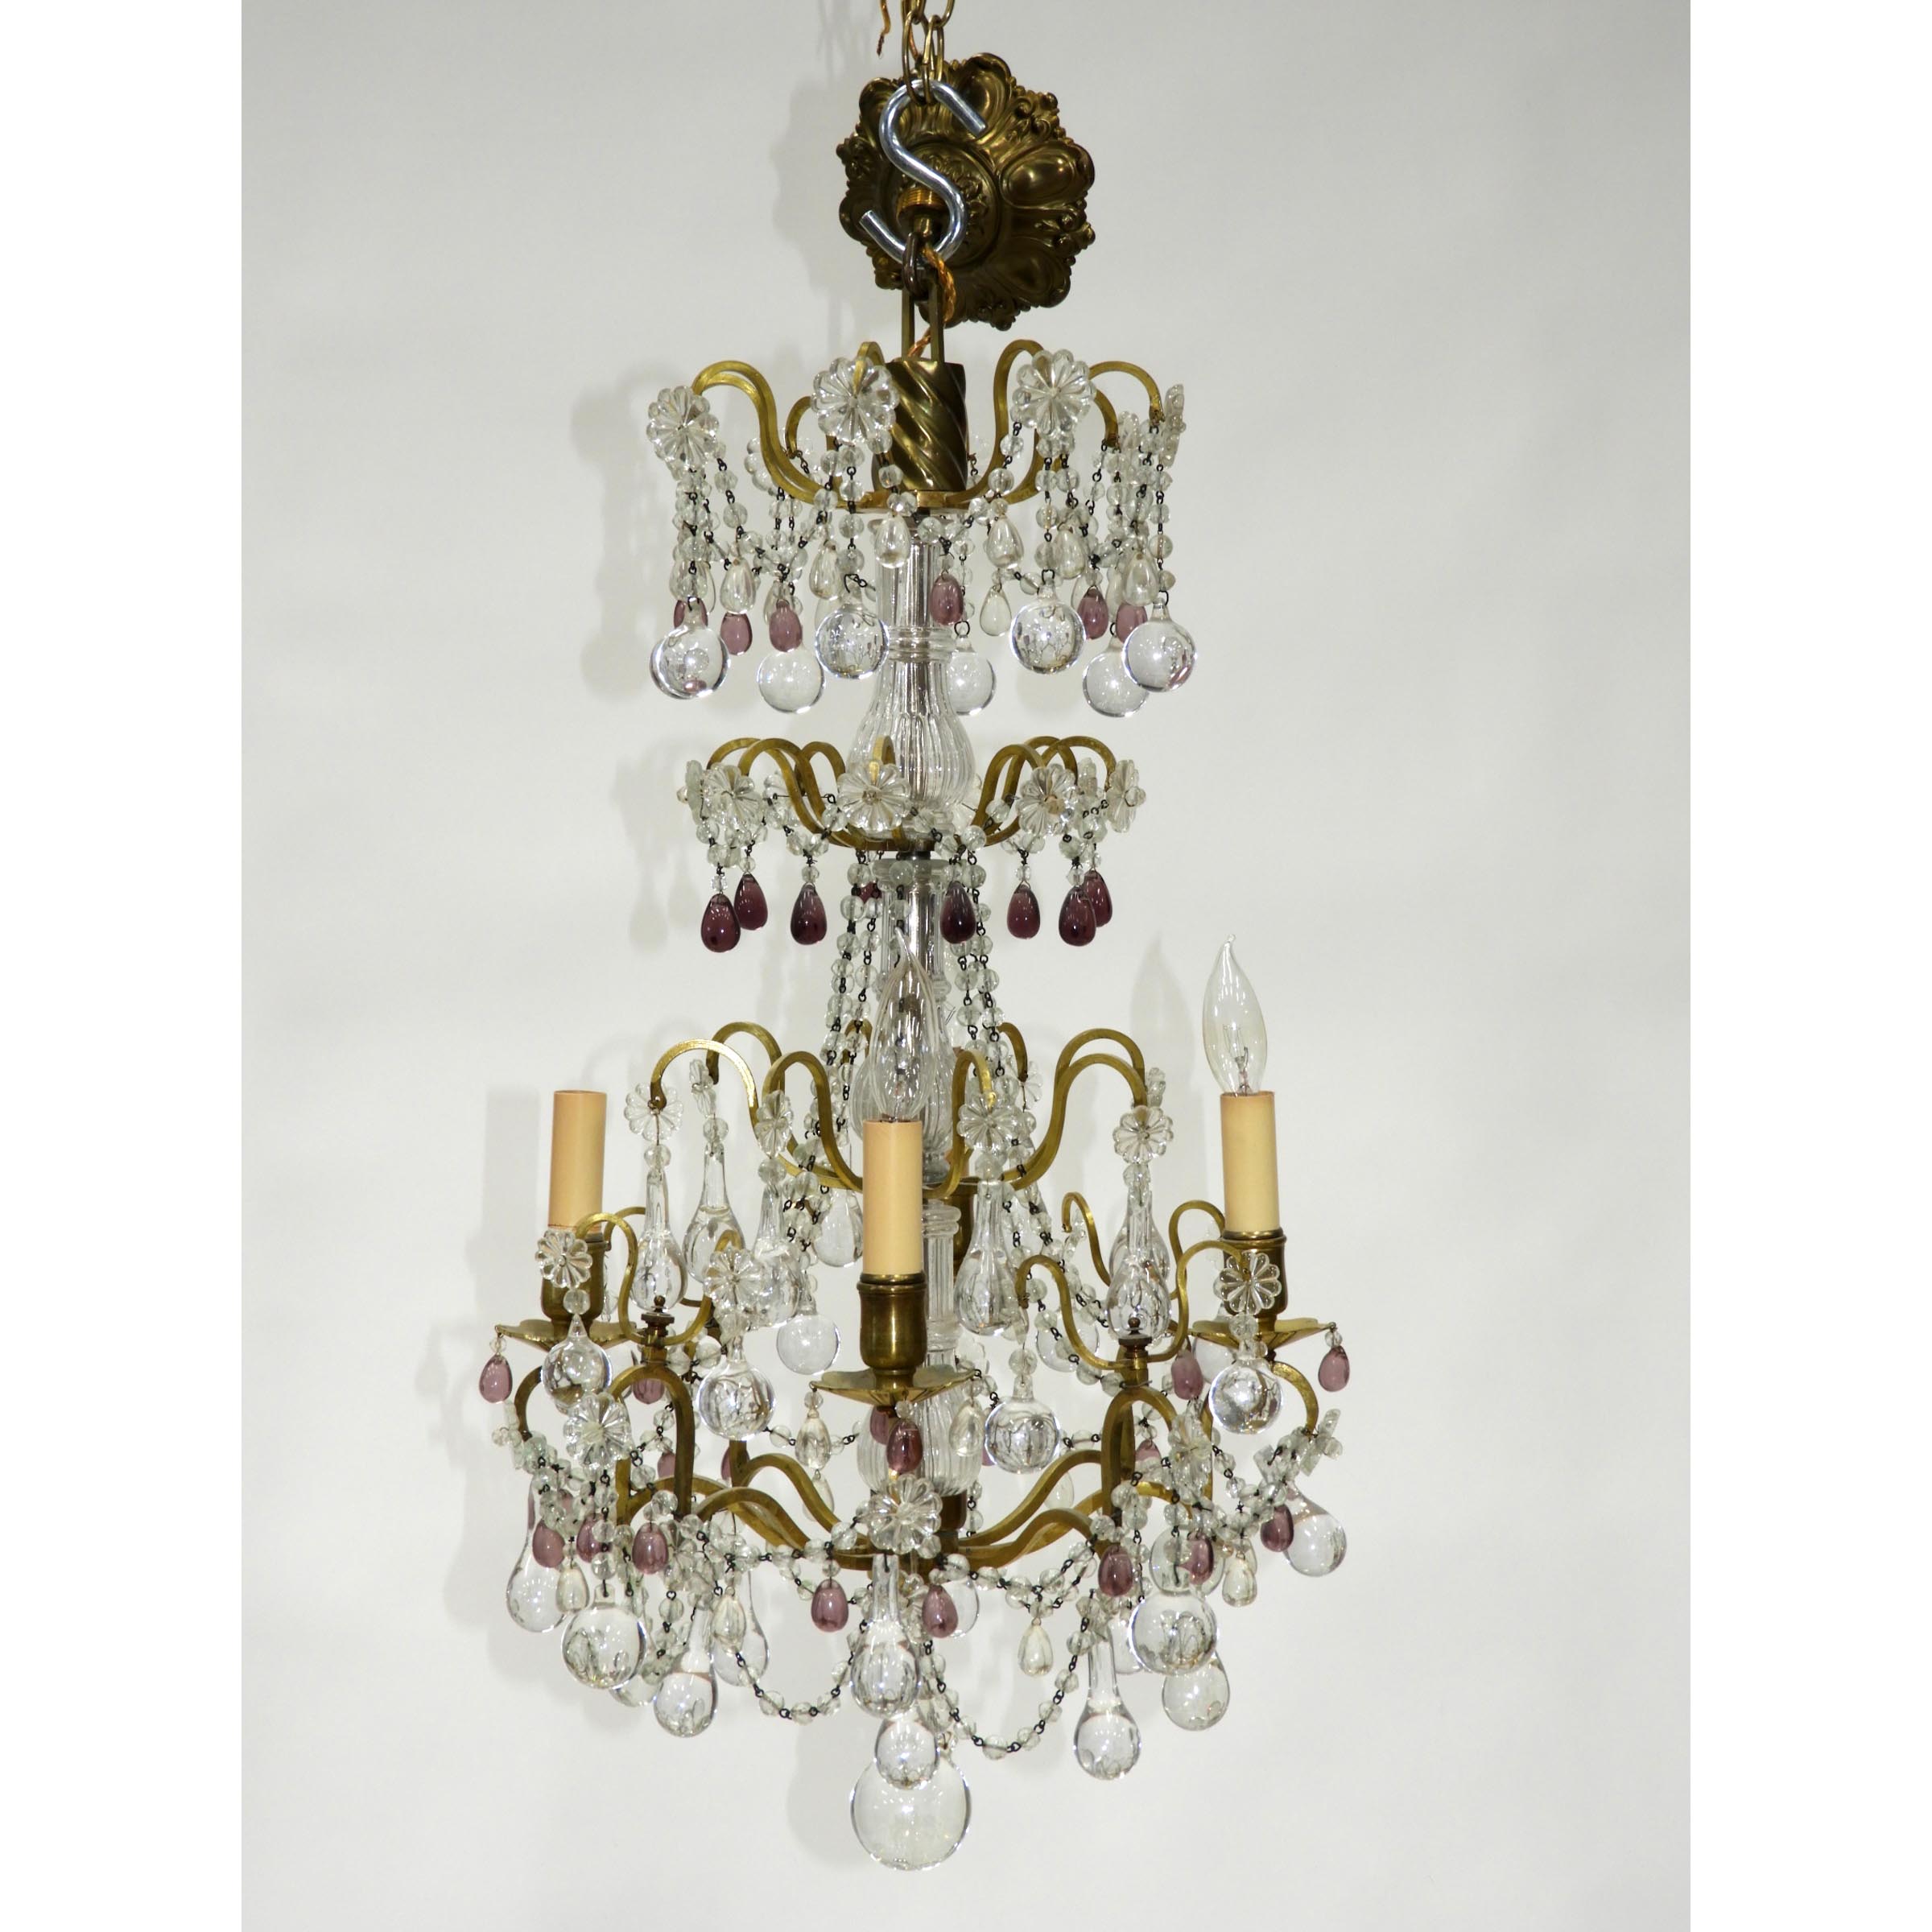 Small French Clear and Coloured Glass Hanging Light Fixture, early 20th century